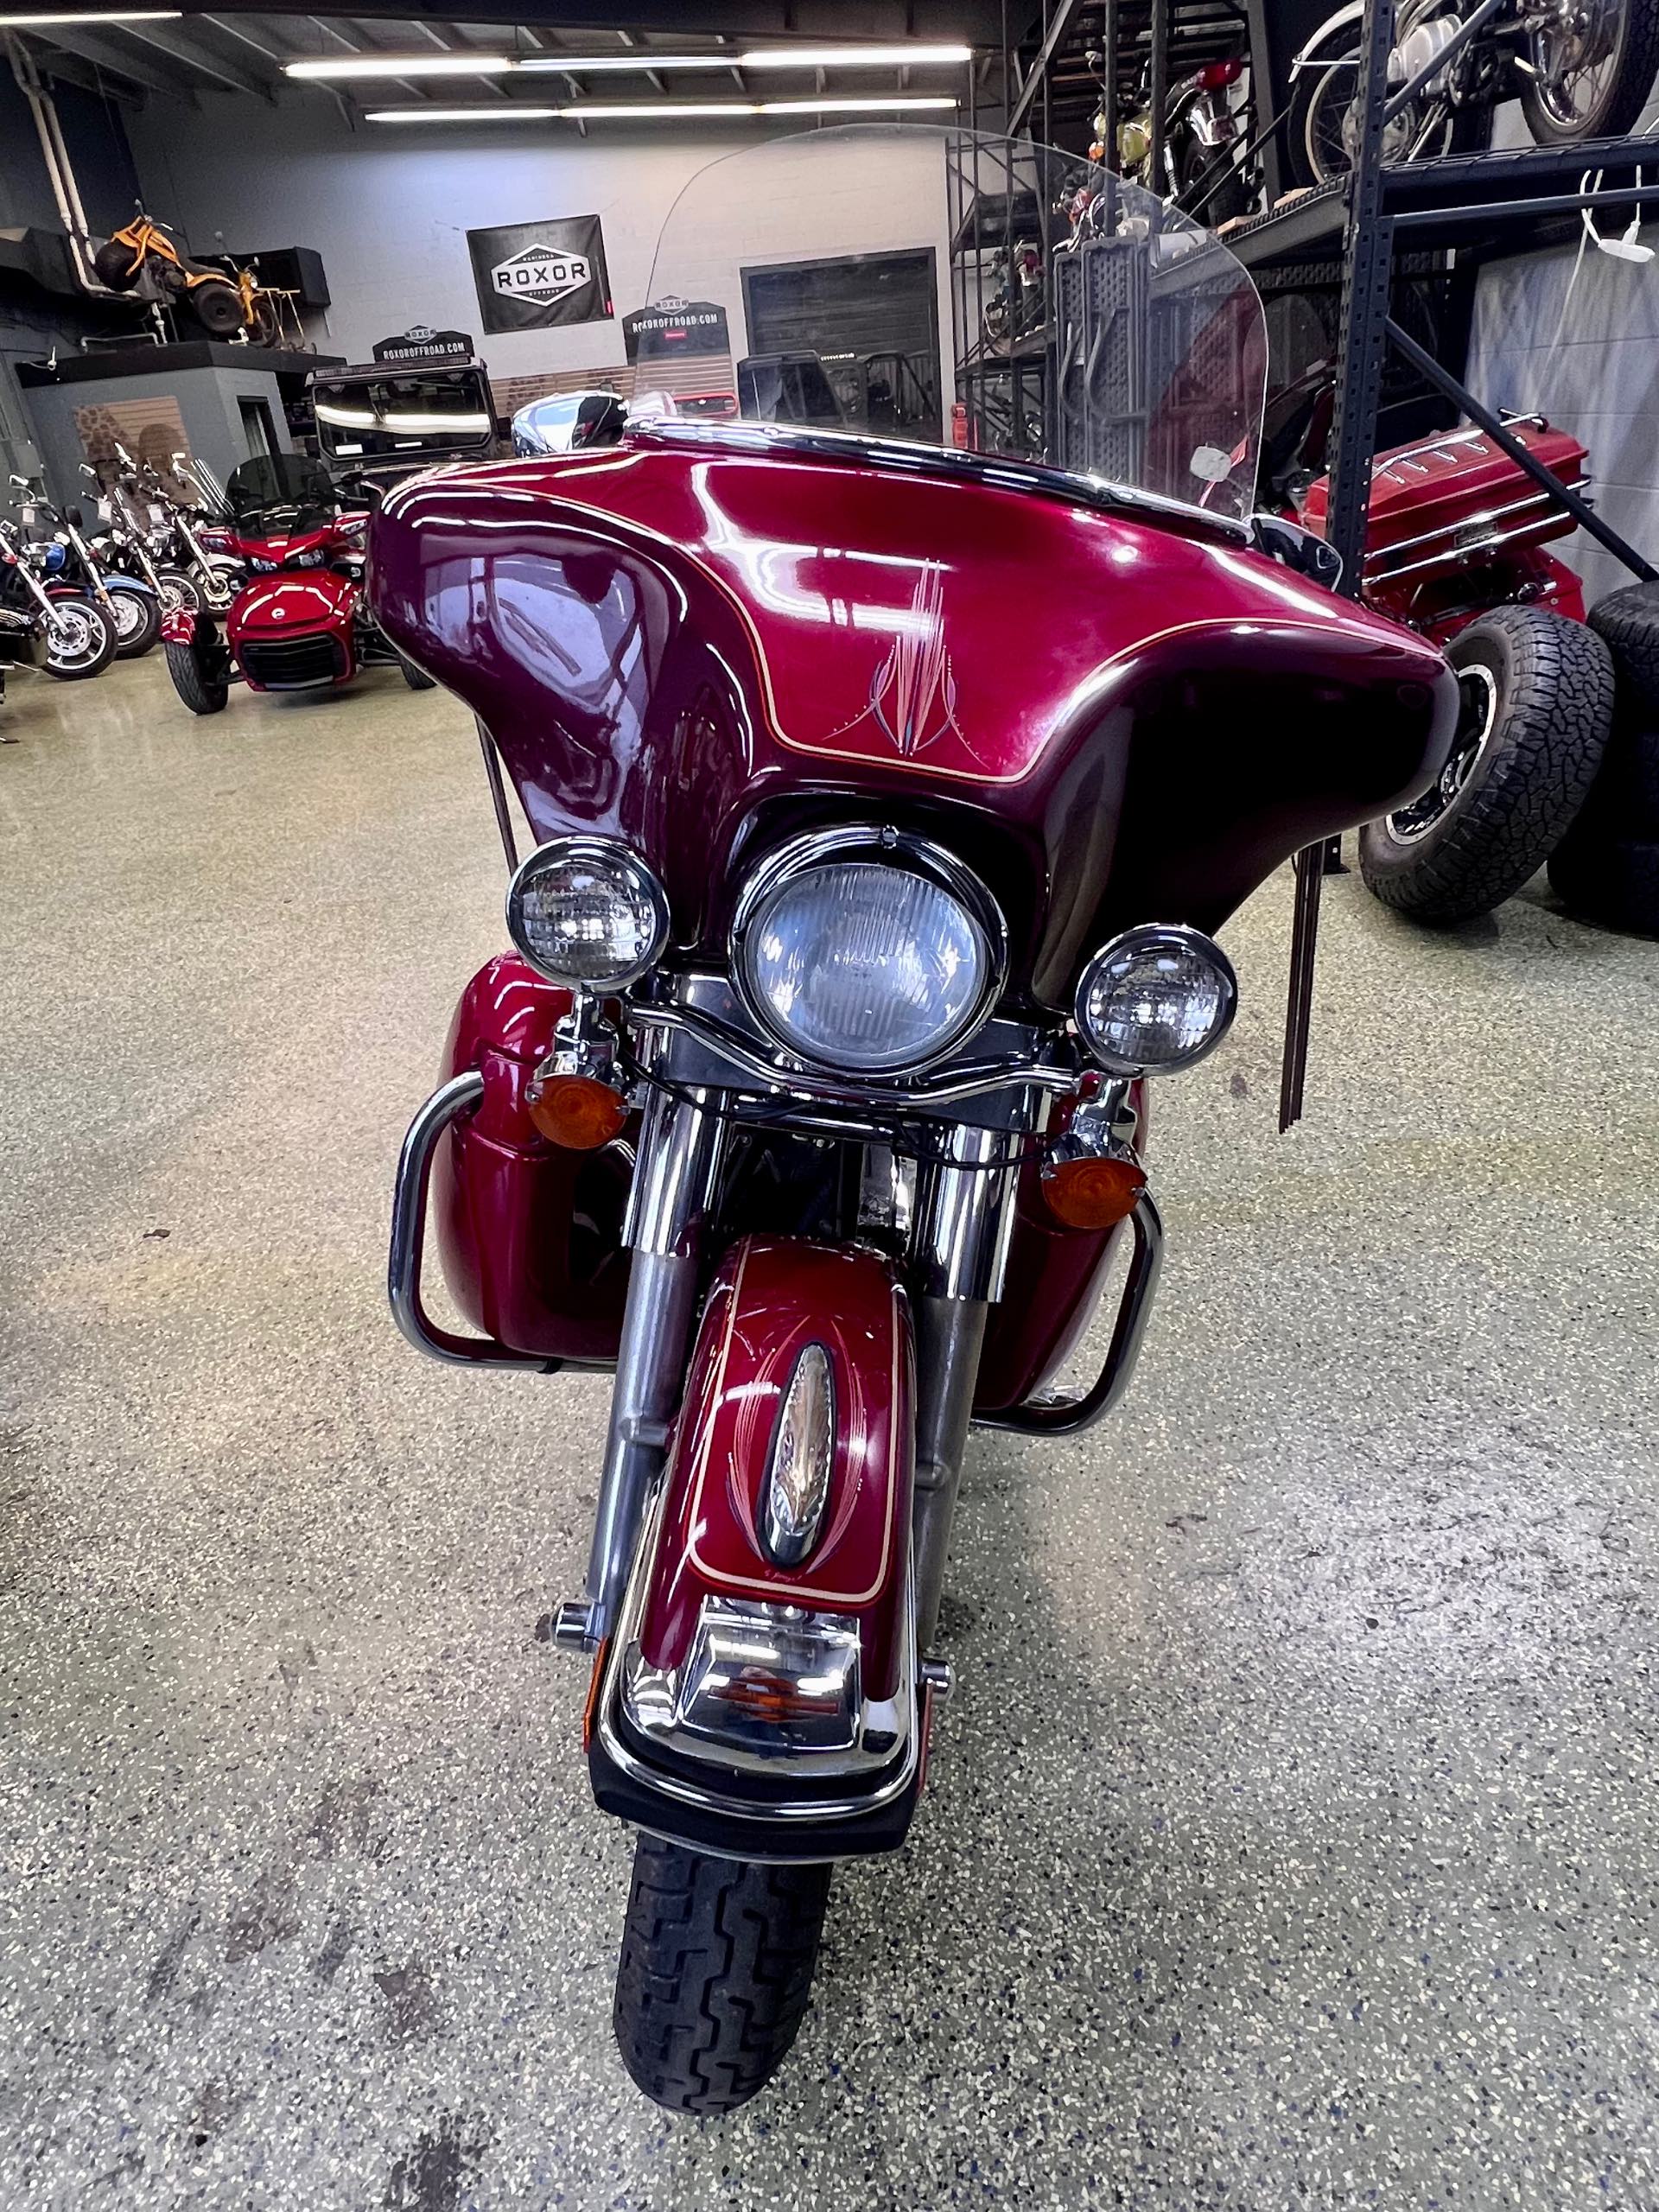 1995 Electra Glide Classic FLHTC at Thornton's Motorcycle Sales, Madison, IN